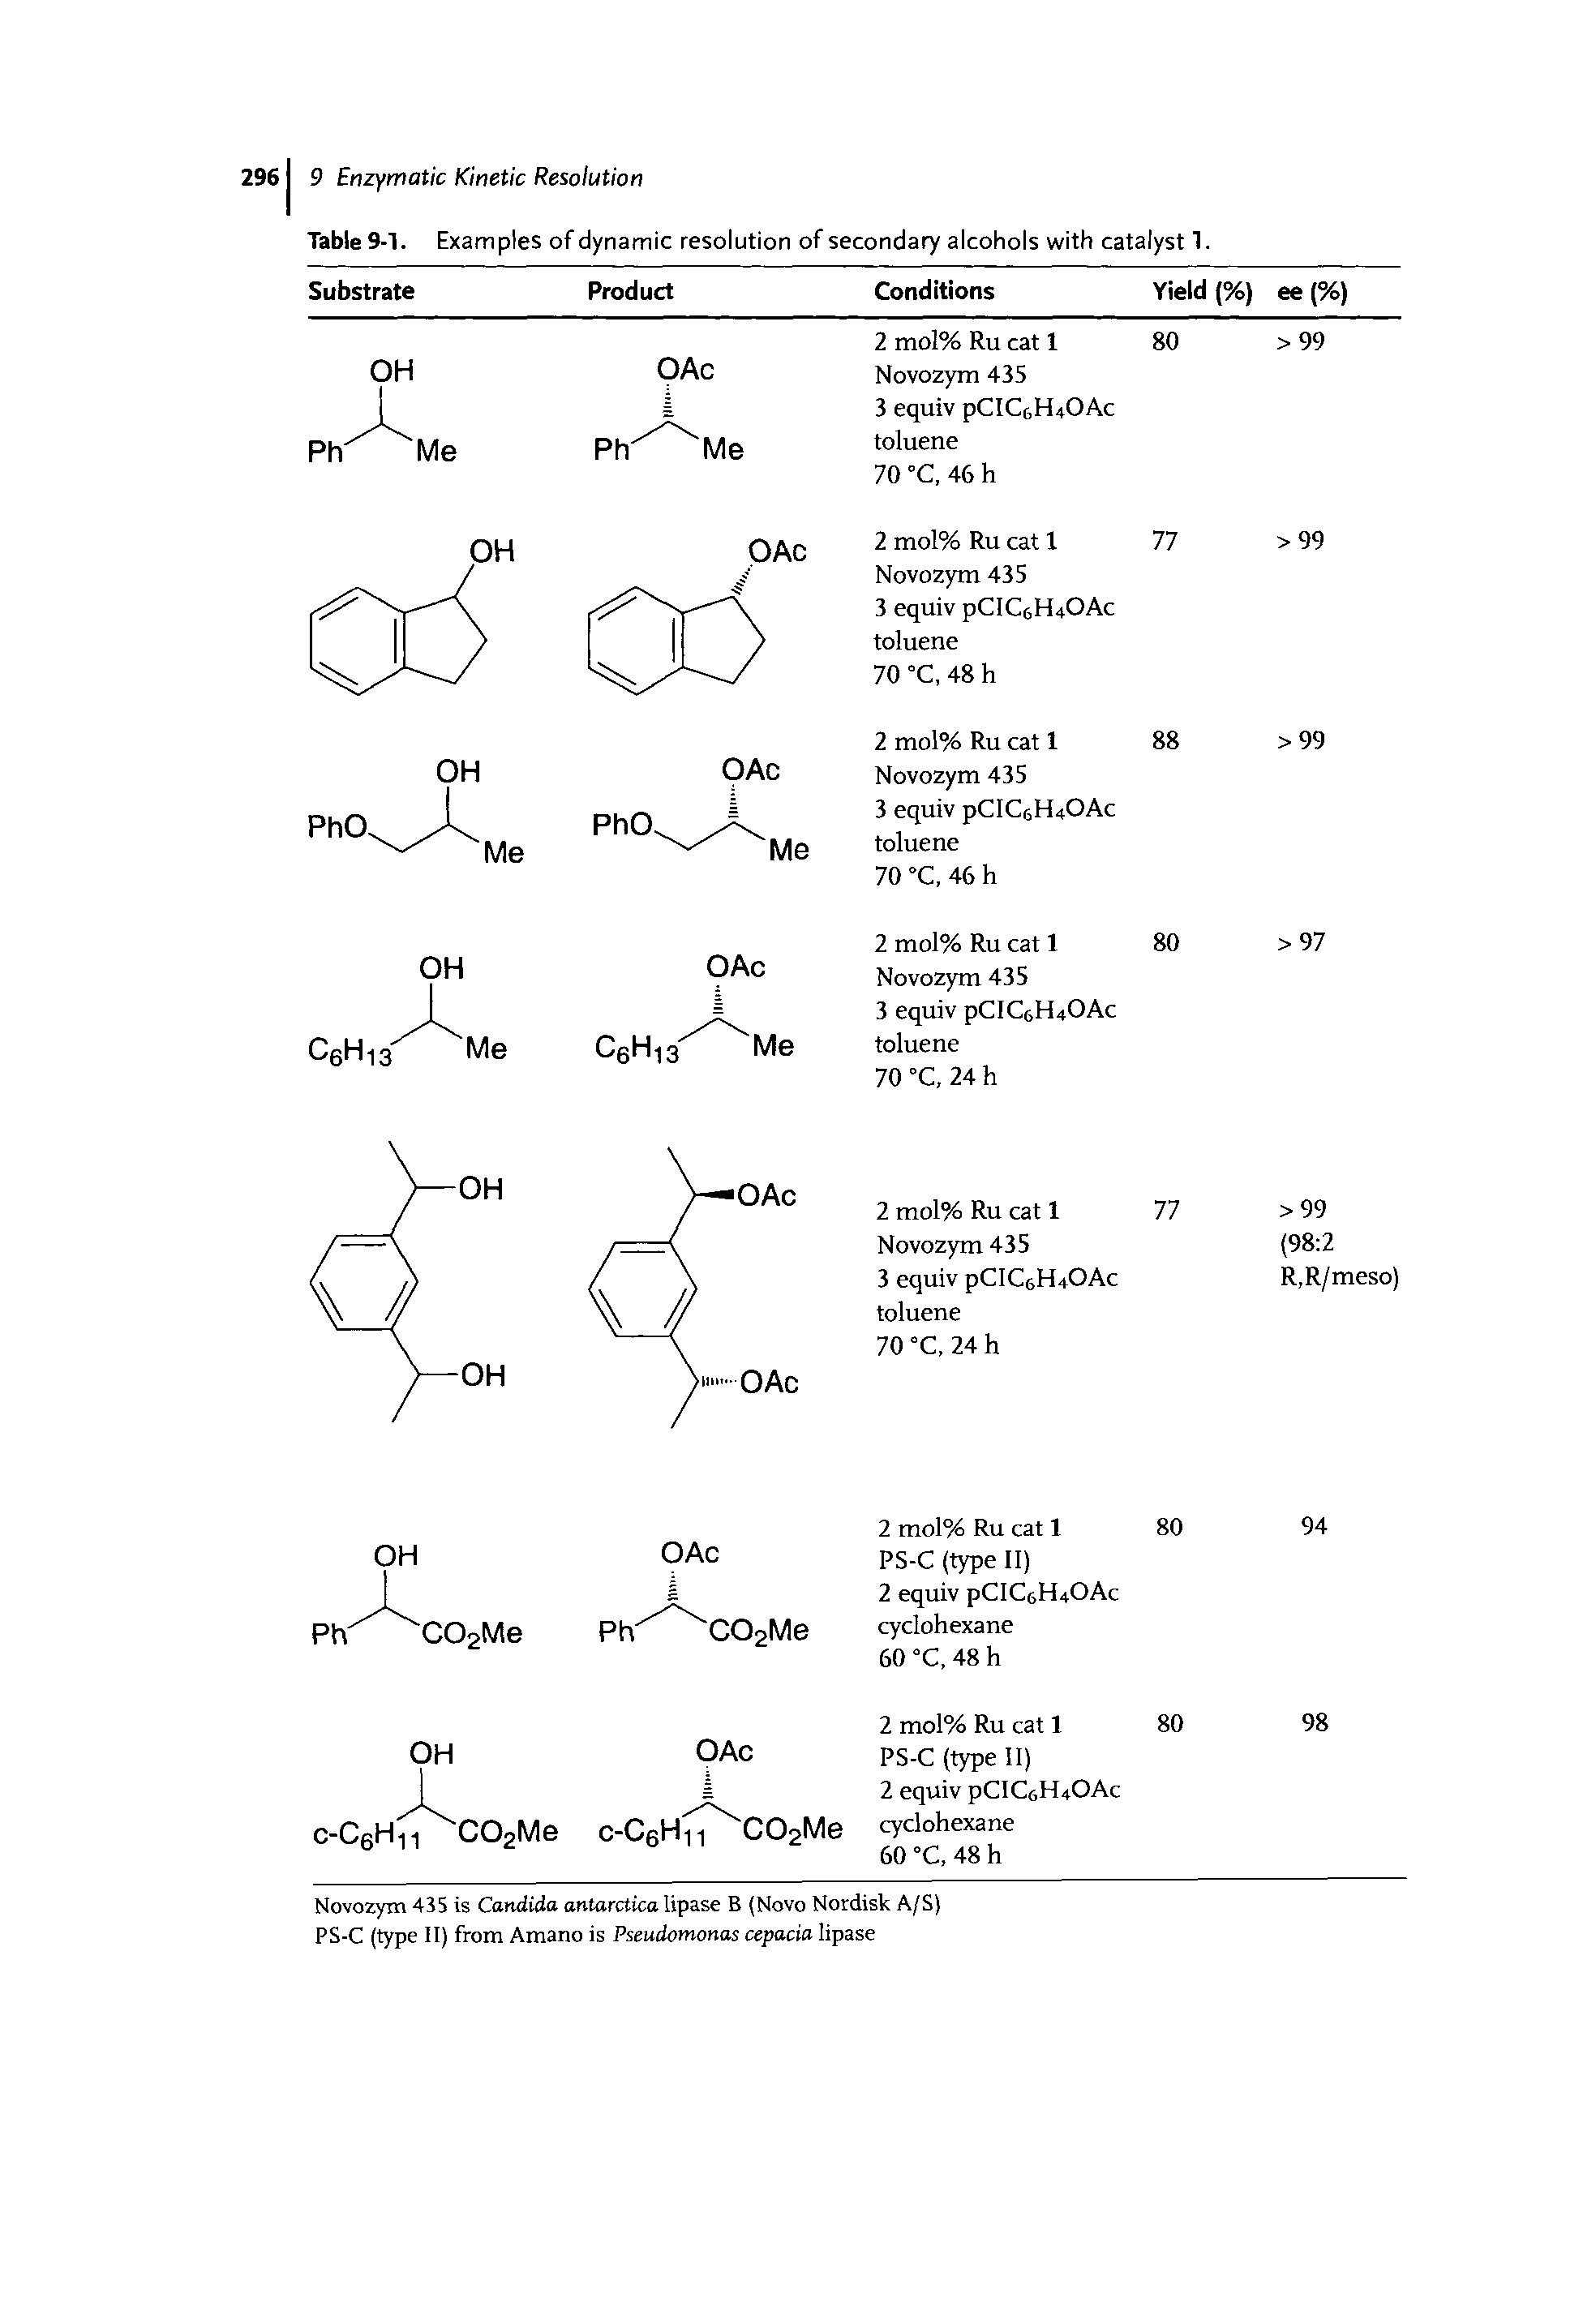 Table 9-1. Examples of dynamic resolution of secondary alcohols with catalyst 1.